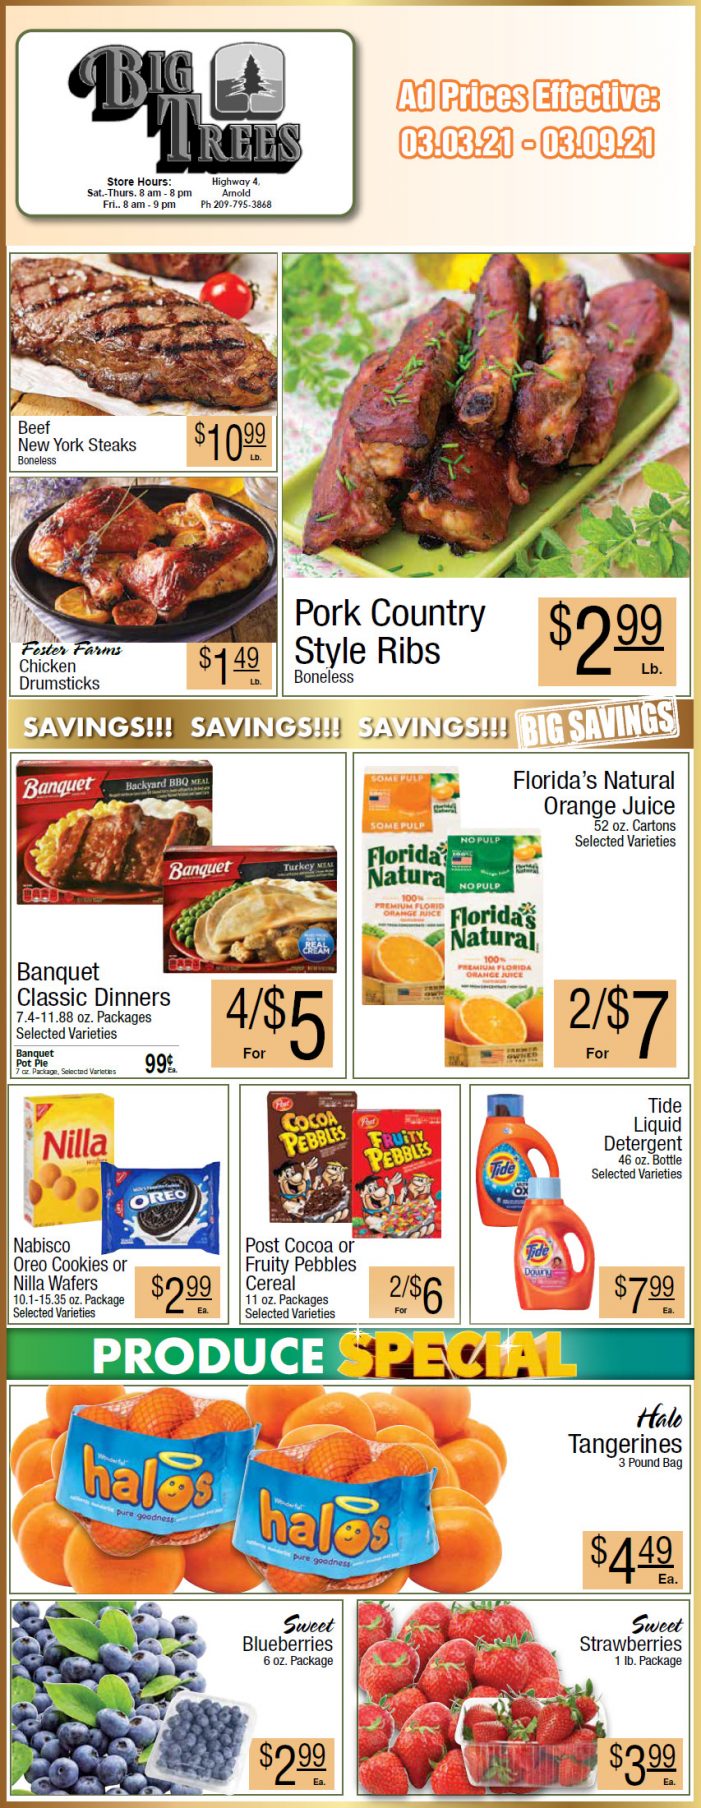 Big Trees Market Weekly Ad & Grocery Specials Through March 9th!